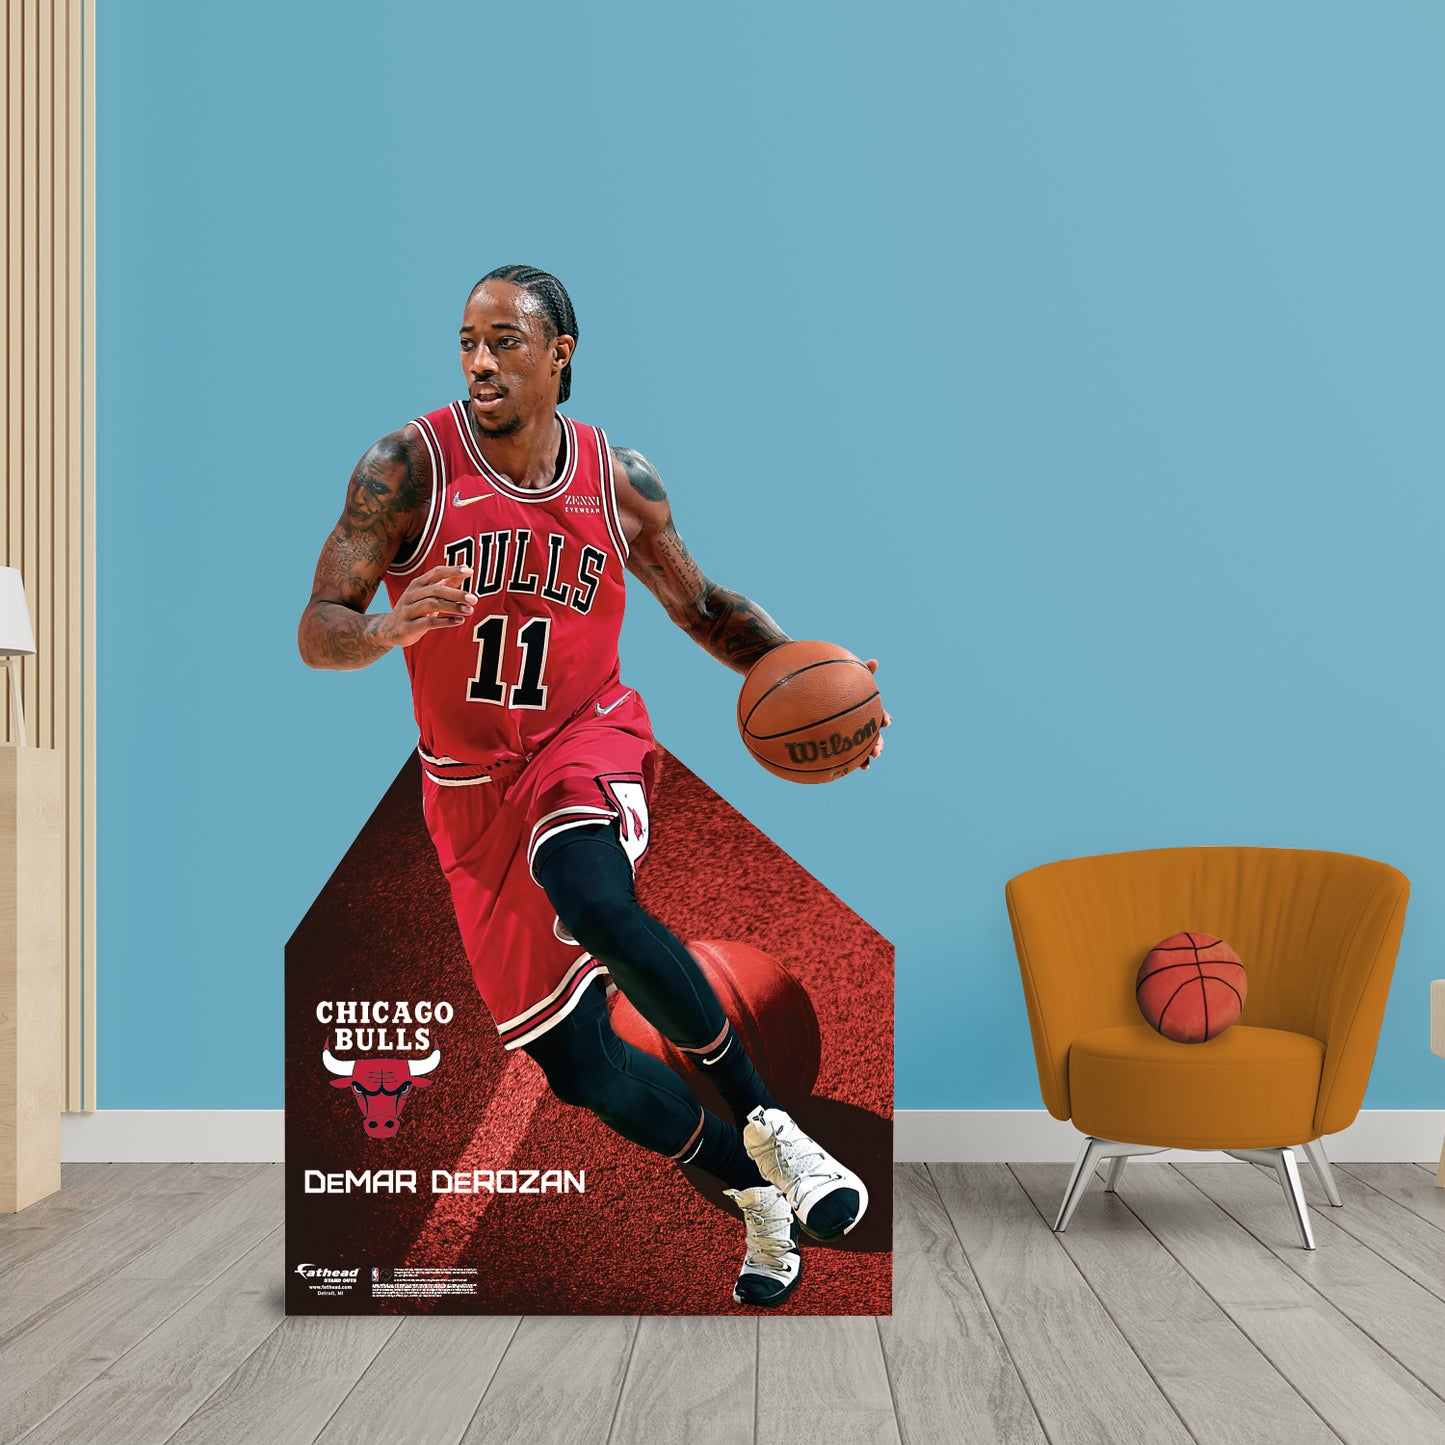 Chicago Bulls: DeMar DeRozan Life-Size Foam Core Cutout - Officially Licensed NBA Stand Out